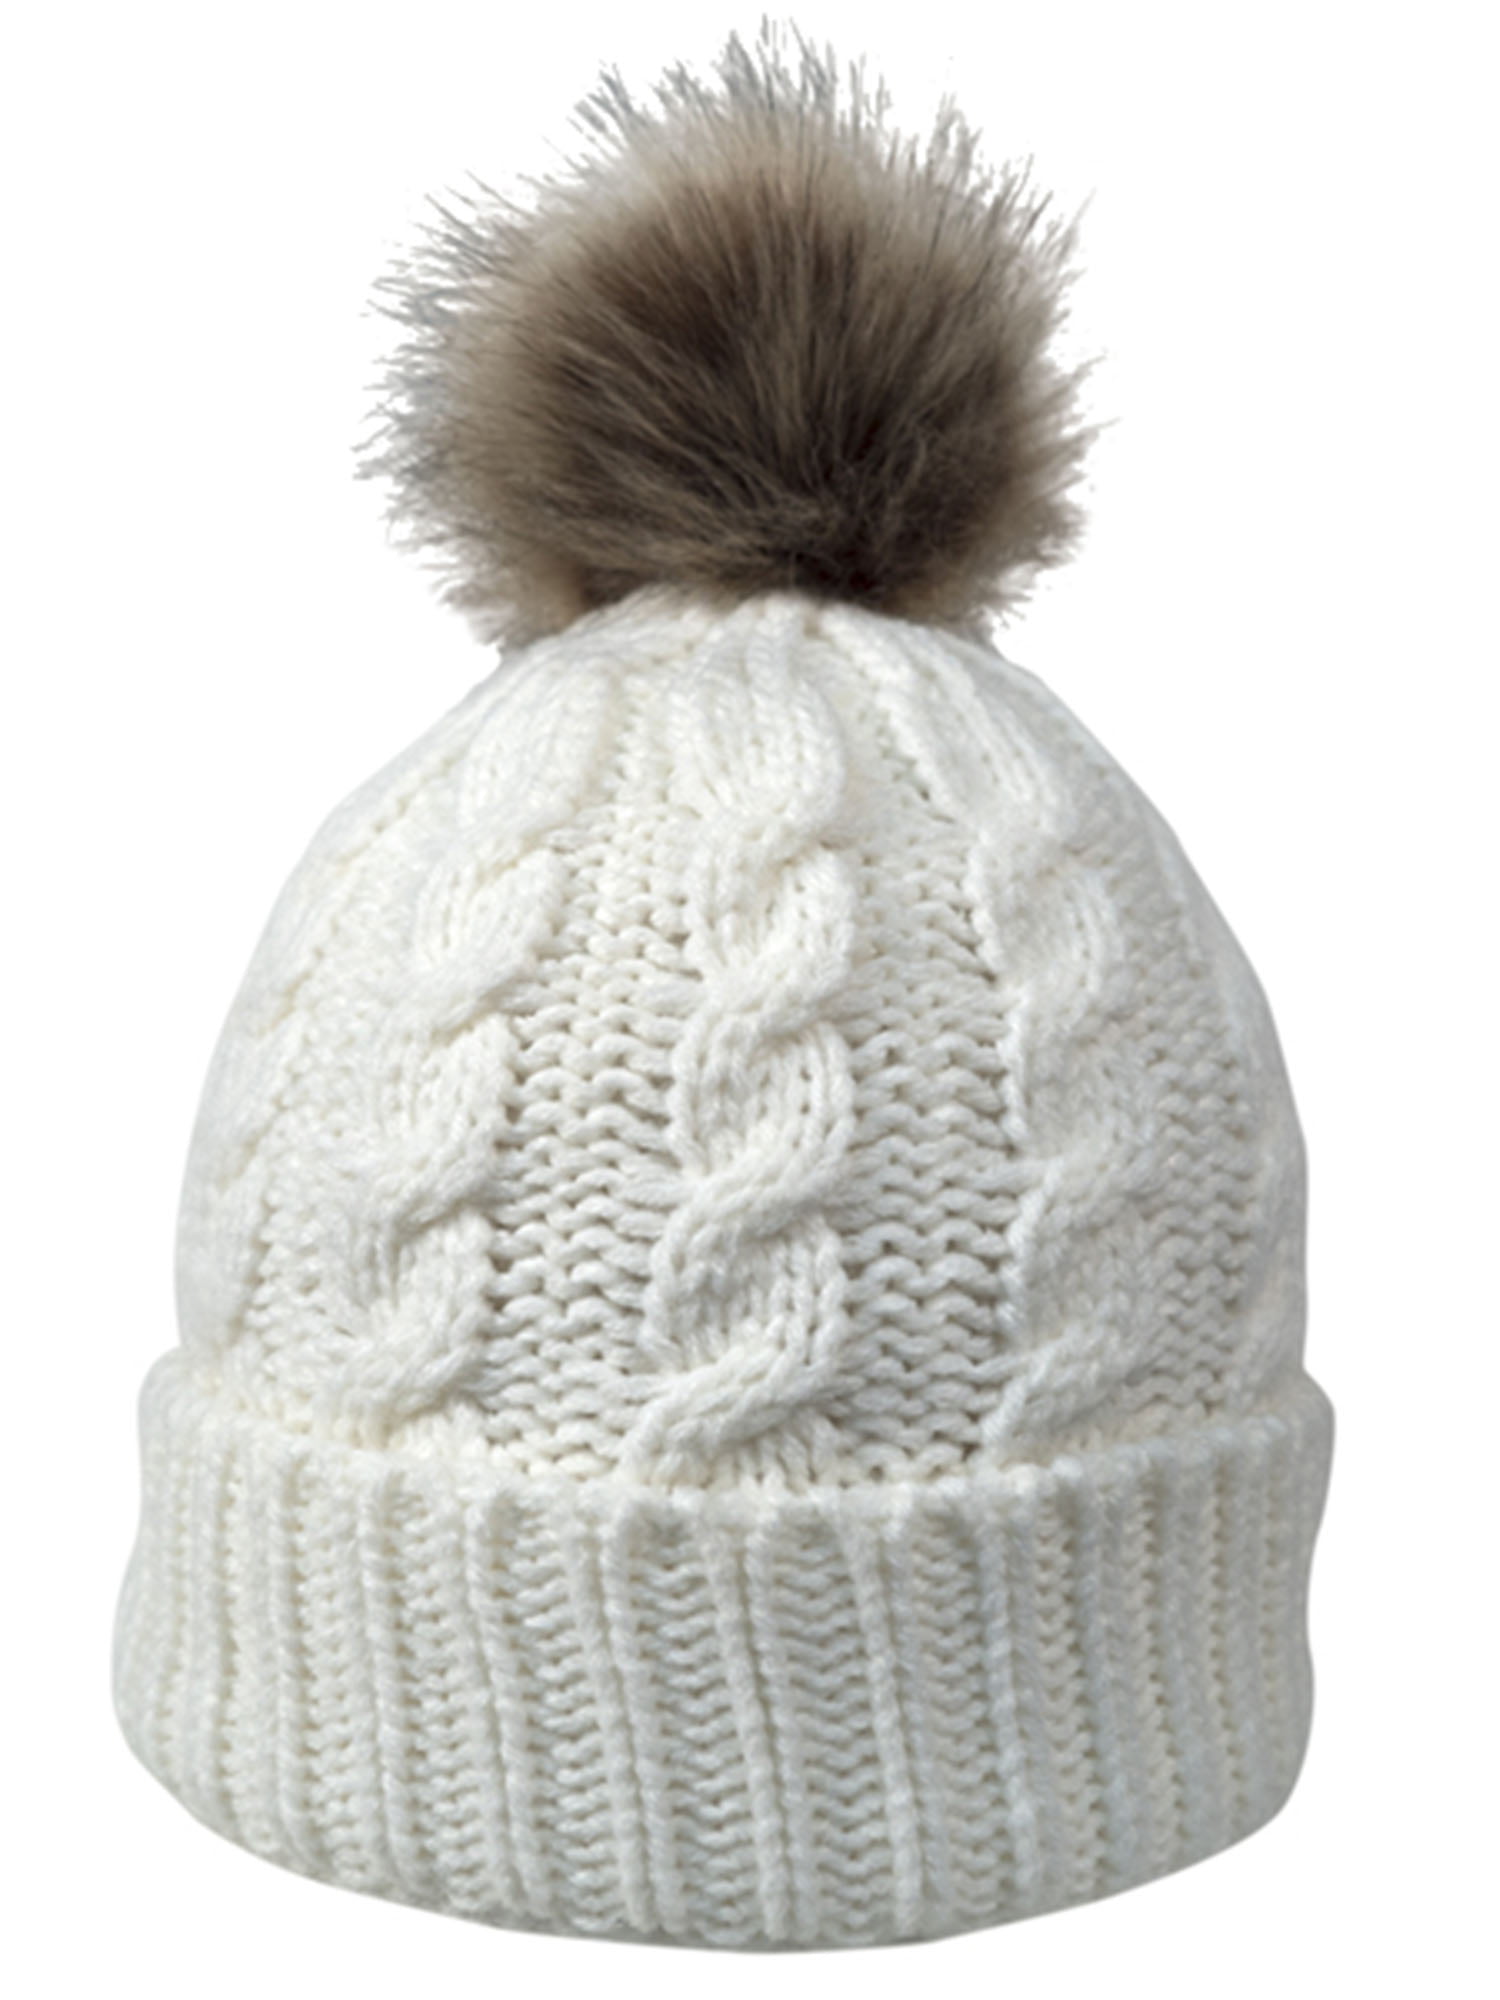 cream winter hat spring fashion Women's faux fur pom hat women's accessories winter women's cream faux fur pom hat fall gifts for her